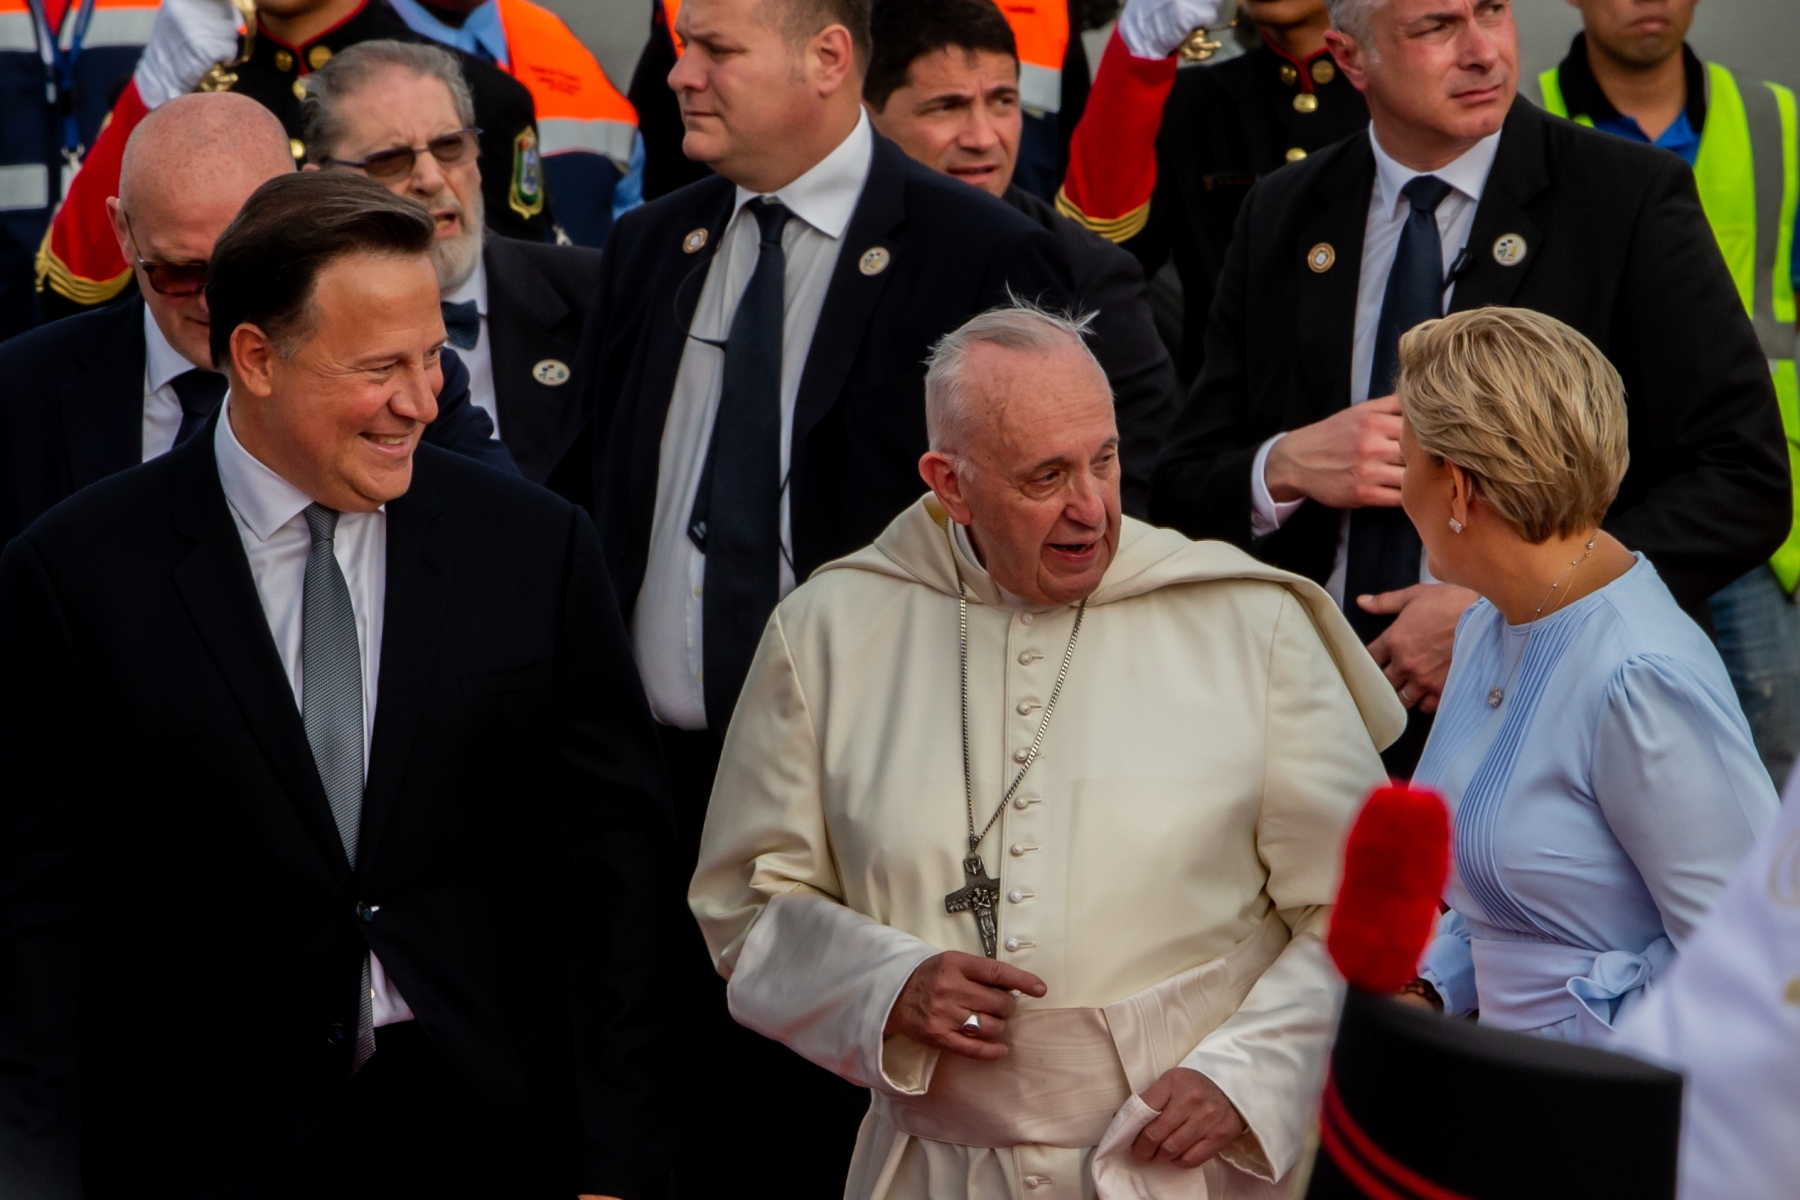 
Pope Francis arrives at Tocumen International Airport in Panama City, Panama to celebrate World Youth Day, and is greeted by President Juan Carlos Varela (L), and First Lady Lorena Castillo (R) on Jan. 23.
(Daniel Ibáñez/CNA)